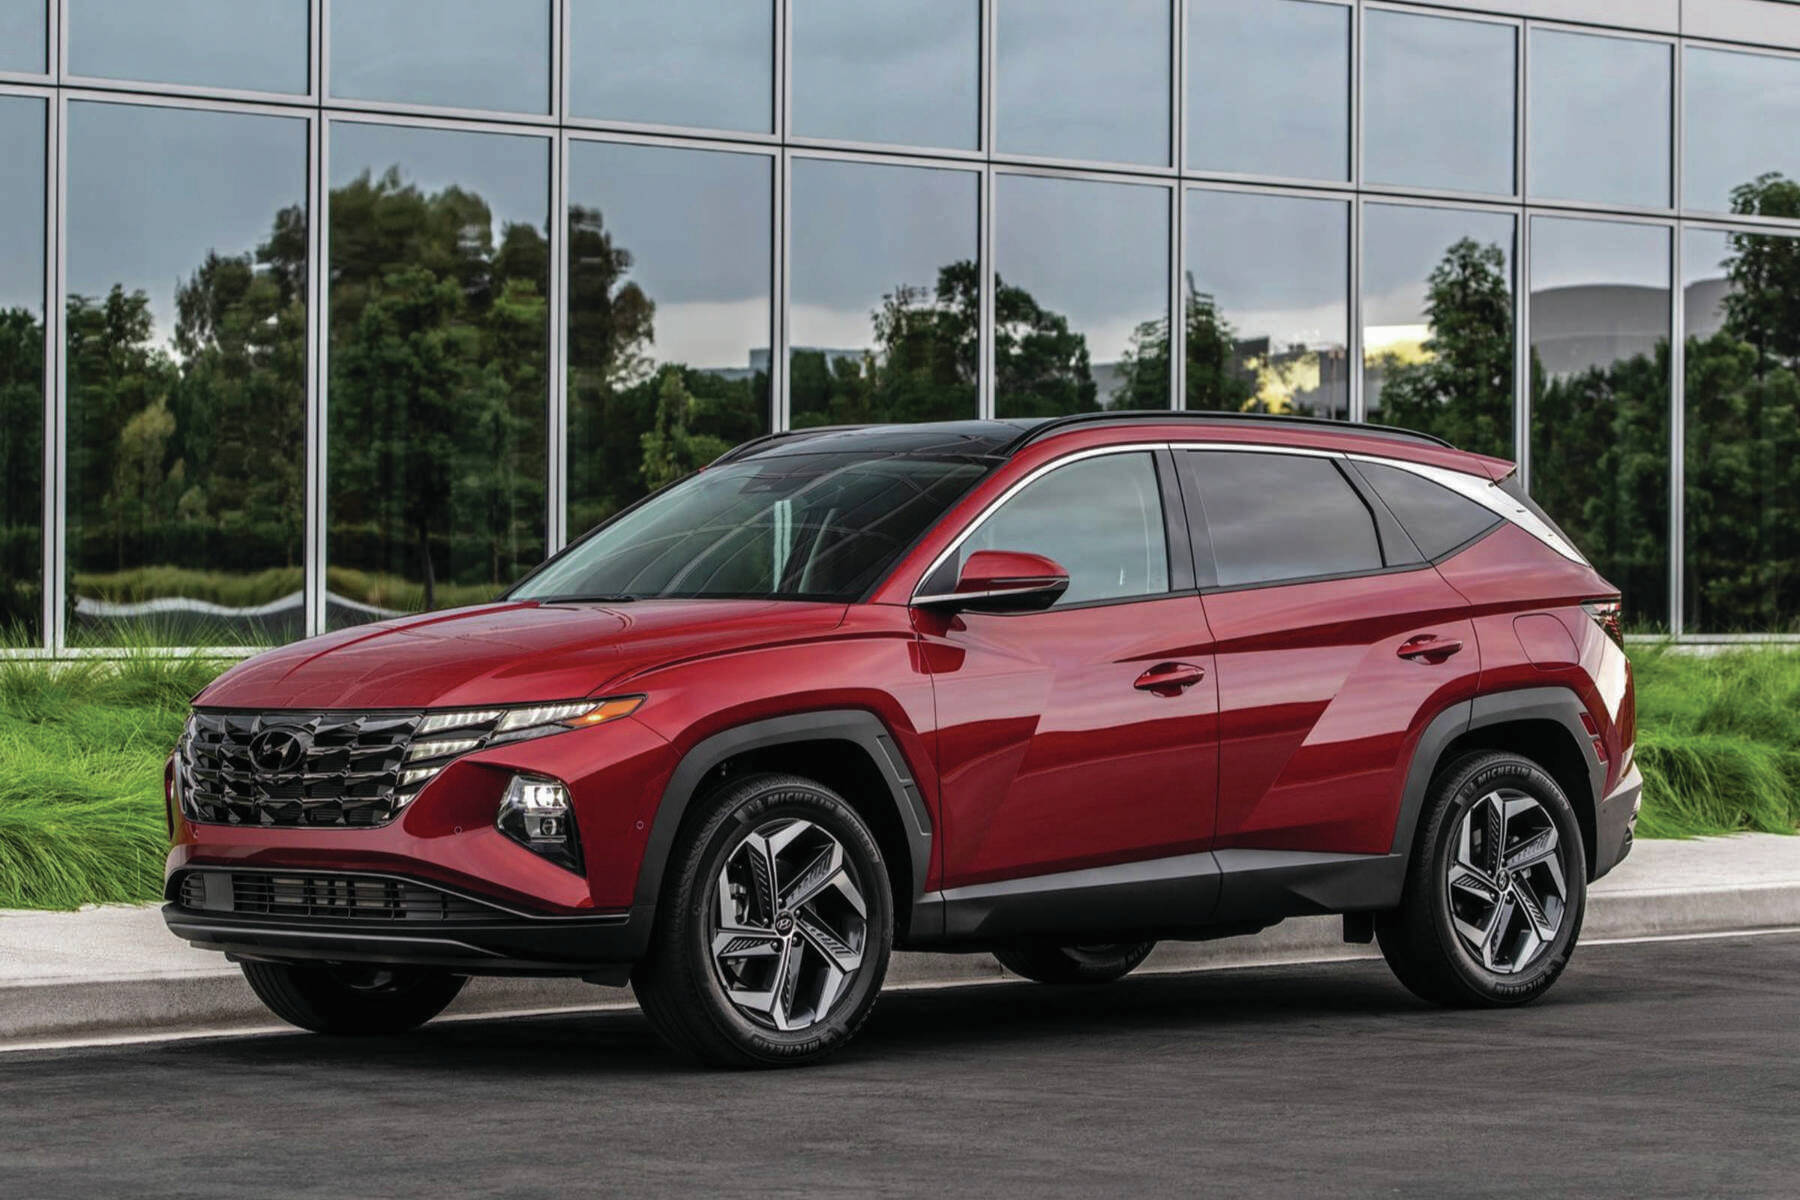 With a bit of dust on the 2022 Tucson, you can easily see the two diagonal cut lines in the doors. The dust also shows that you can take the Tucson off the asphalt, although this would likely be a better experience with the optional all-wheel-drive. PHOTO: HYUNDAI